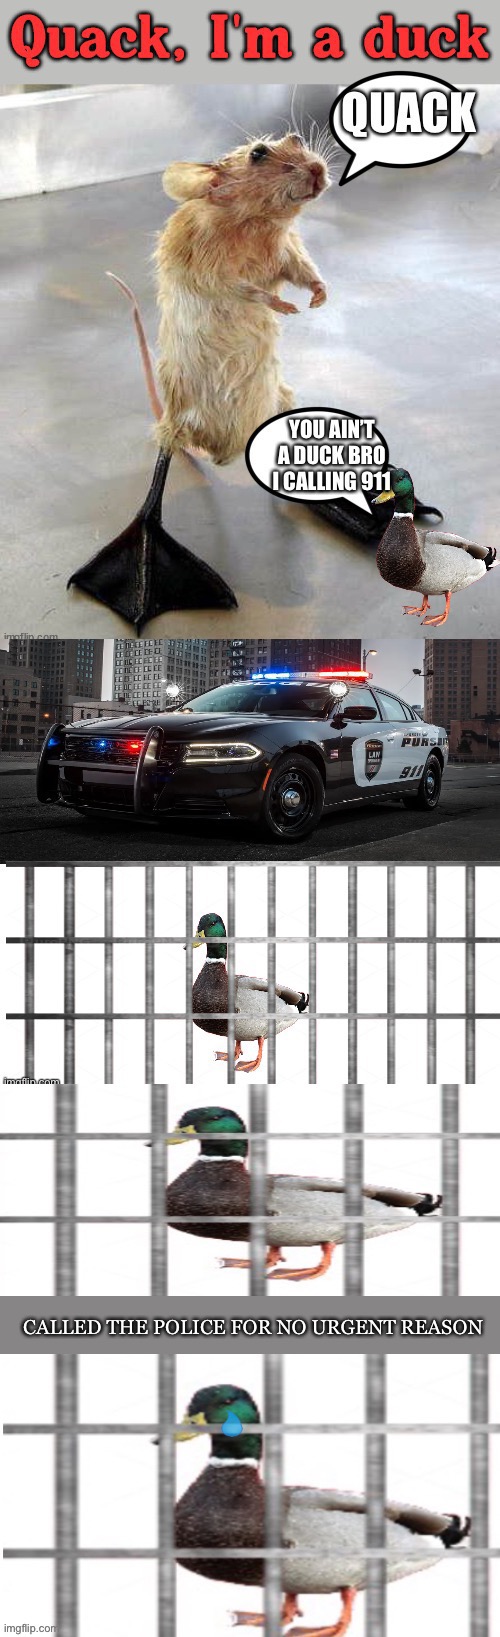 I give most of the credit to who_am_i | image tagged in duck,quack,911,help,police,reason | made w/ Imgflip meme maker